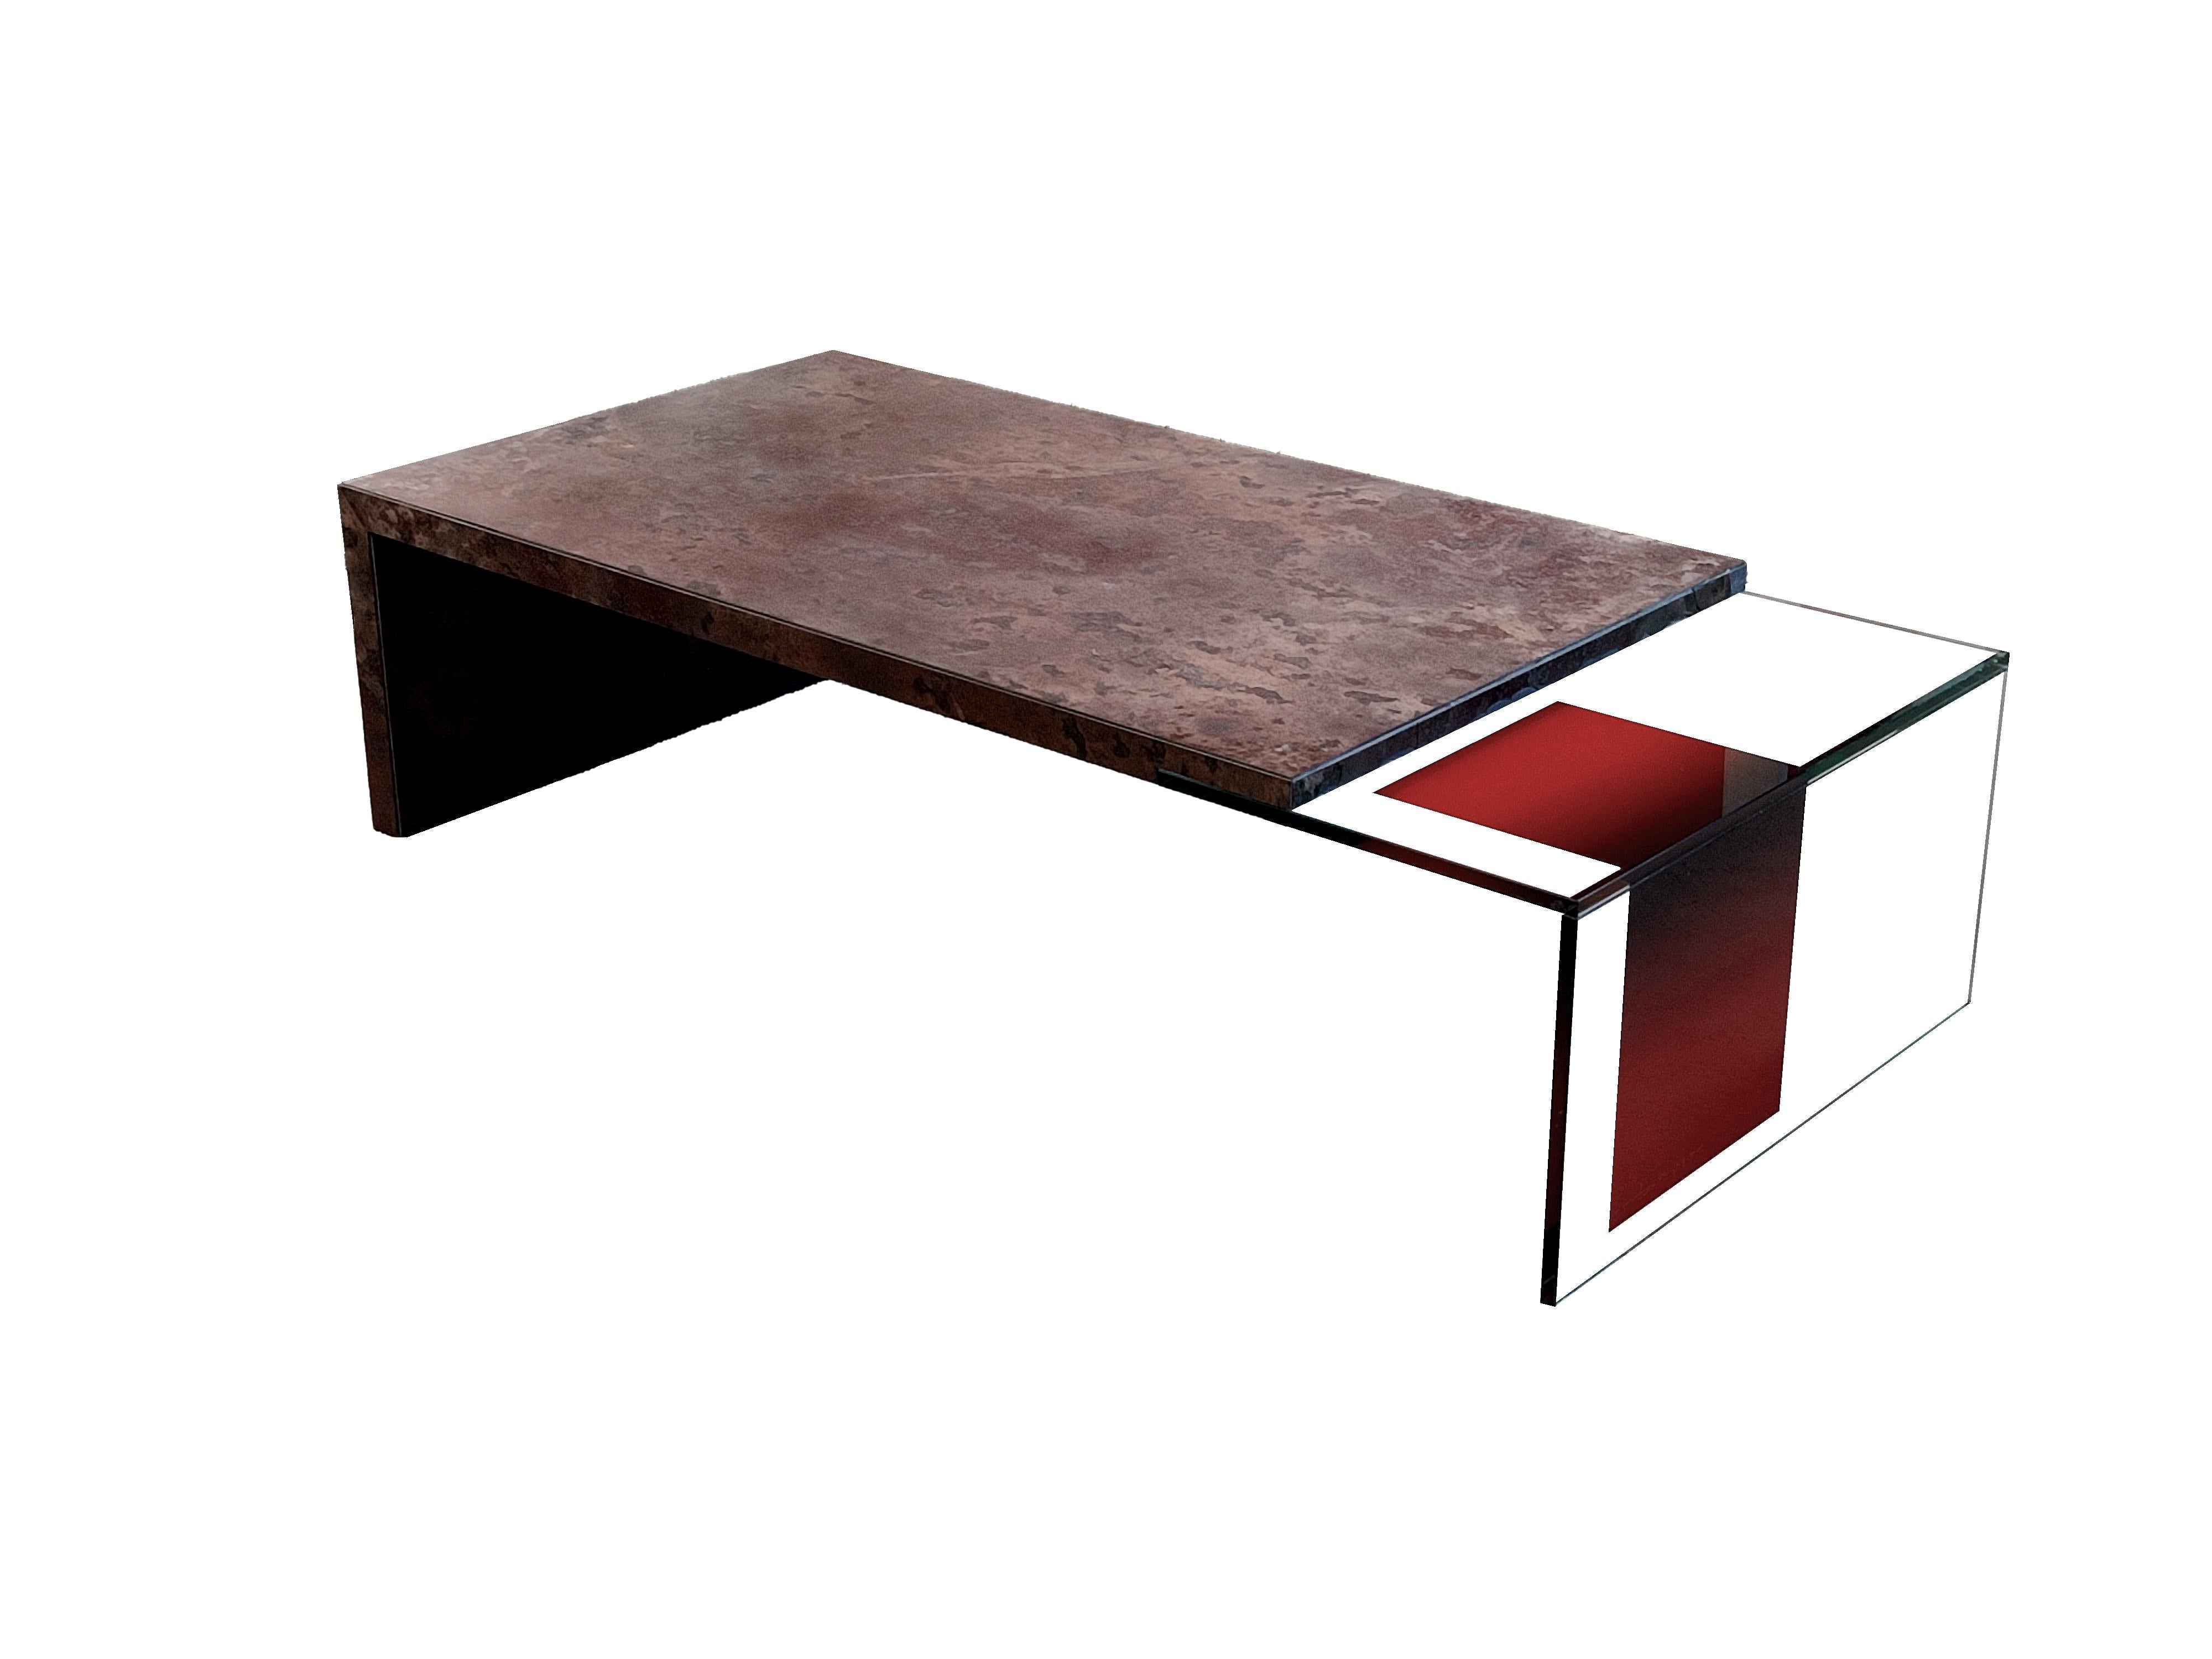 Joano coffe marble Design table Unique Piece Contemporary Artist Spain.
Joano is a coffee table made in Spain, limited edition of a single piece collaboration between the artist and designer Joaquín Moll and the artist painter Luciano Esteban, both